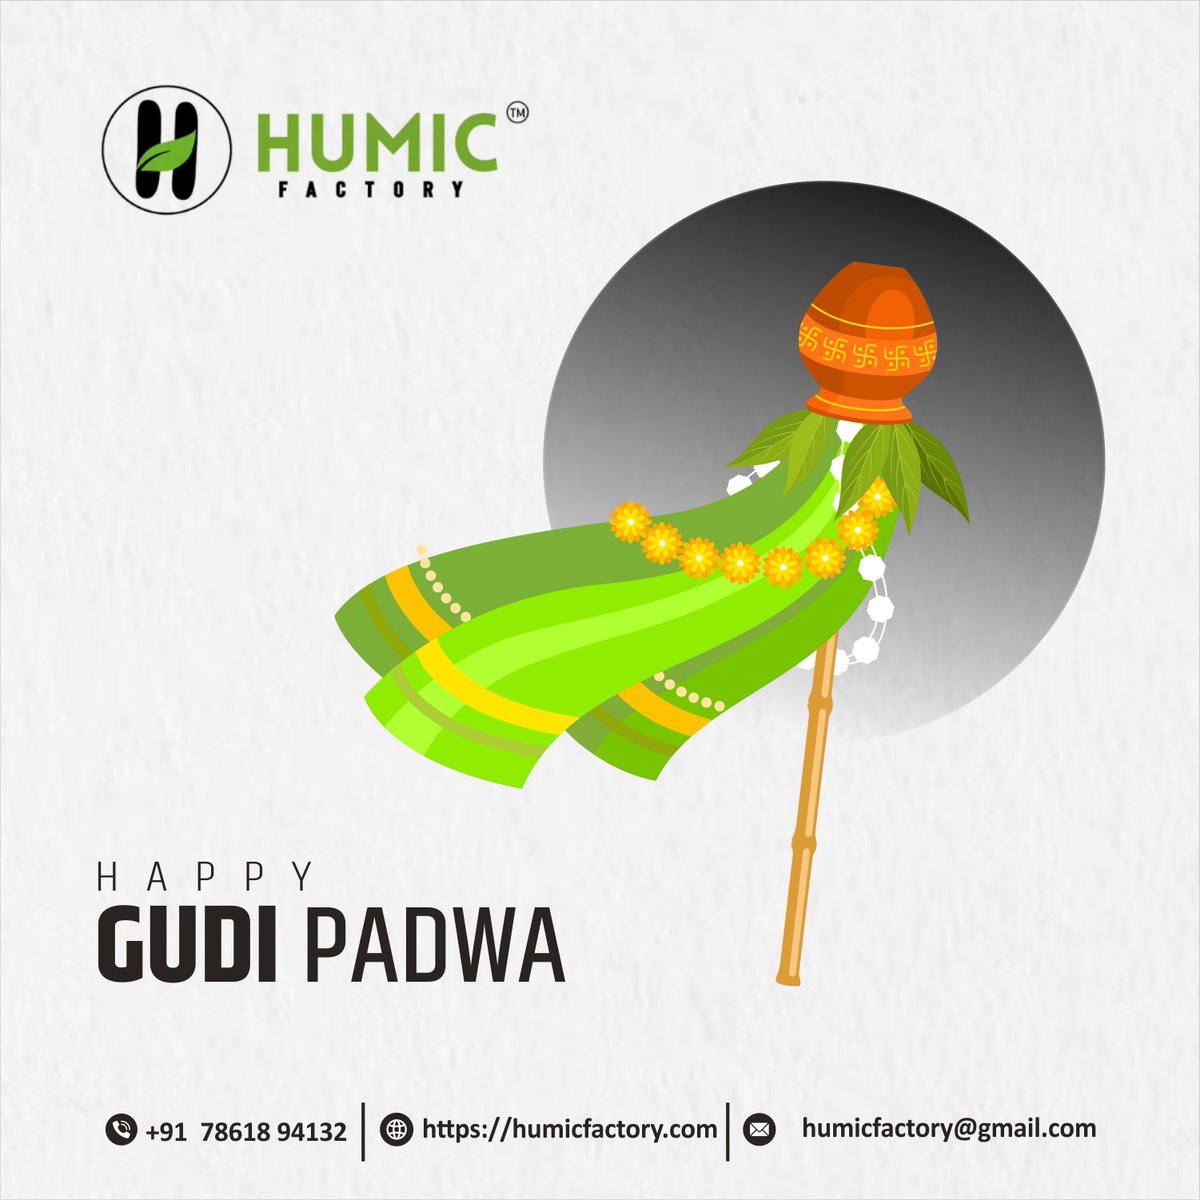 'May the Gudi of prosperity and happiness grace your life with abundance this Gudi Padwa! 🌟 Happy celebrations to all!' . #GudiPadwa2024 #maharashtrafestivities #celebratinggudipadwa #indiantradition #traditionalfestival #maharashtraculture #GudiPadwa #humicfactory